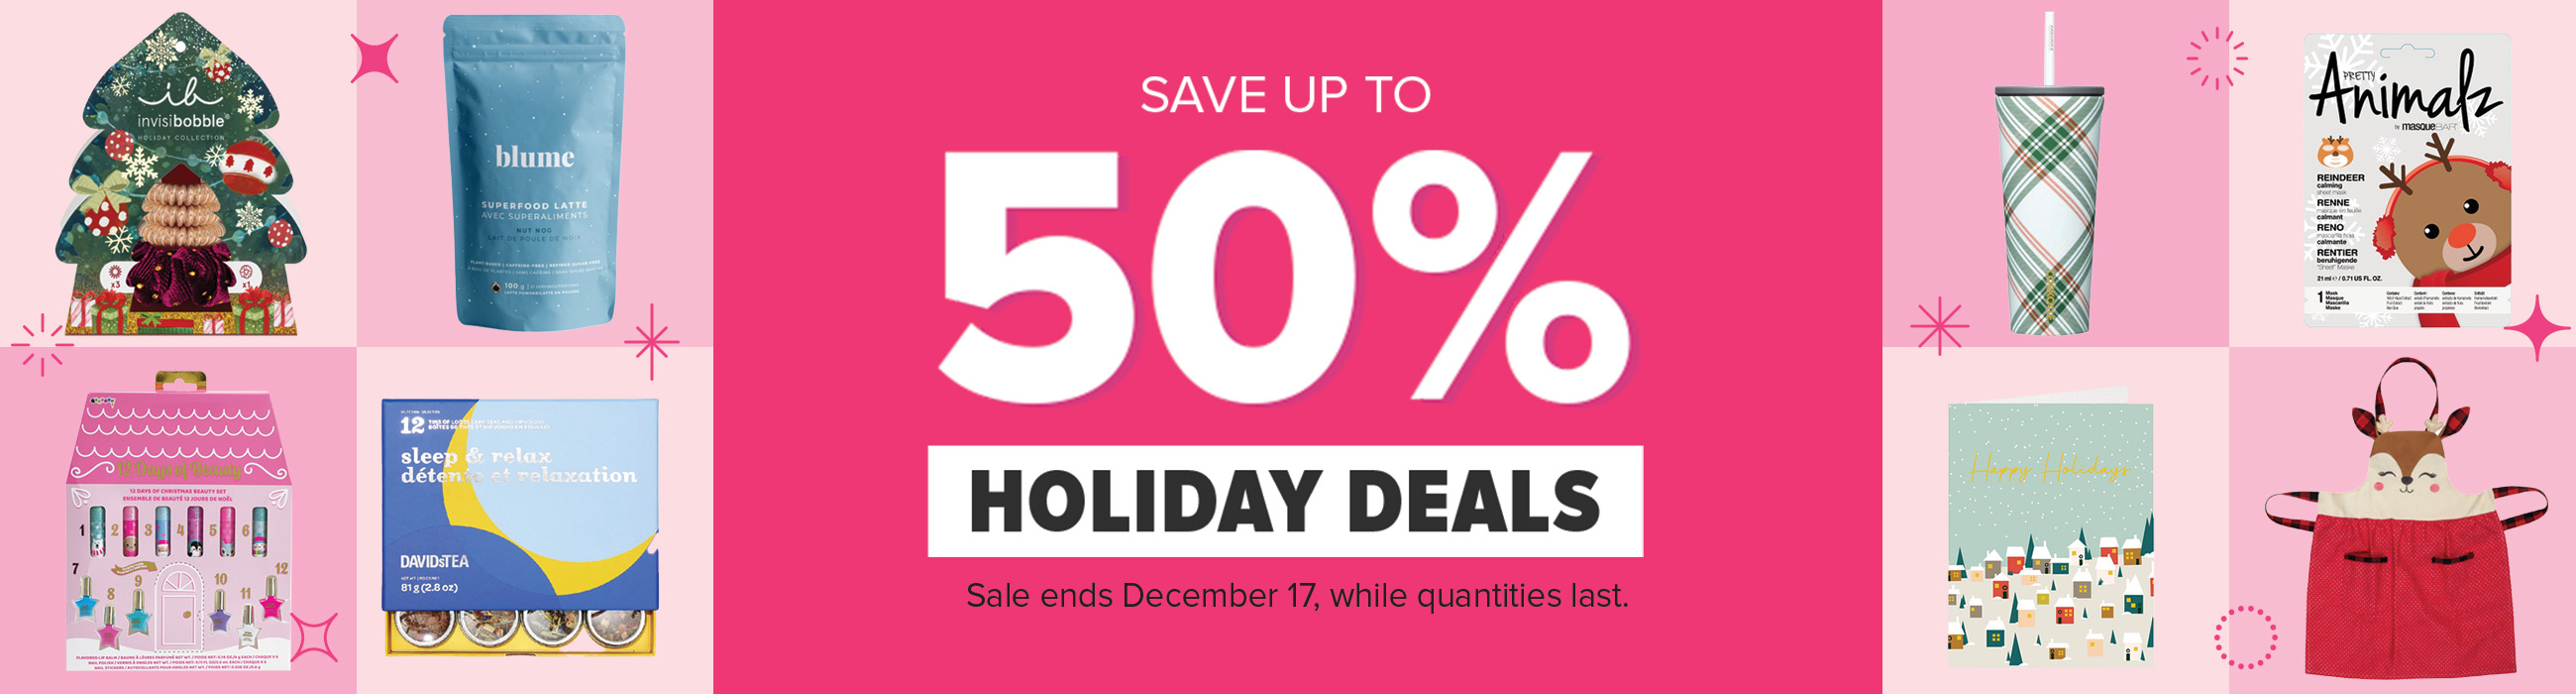 Save up to 50% on Holiday Deals